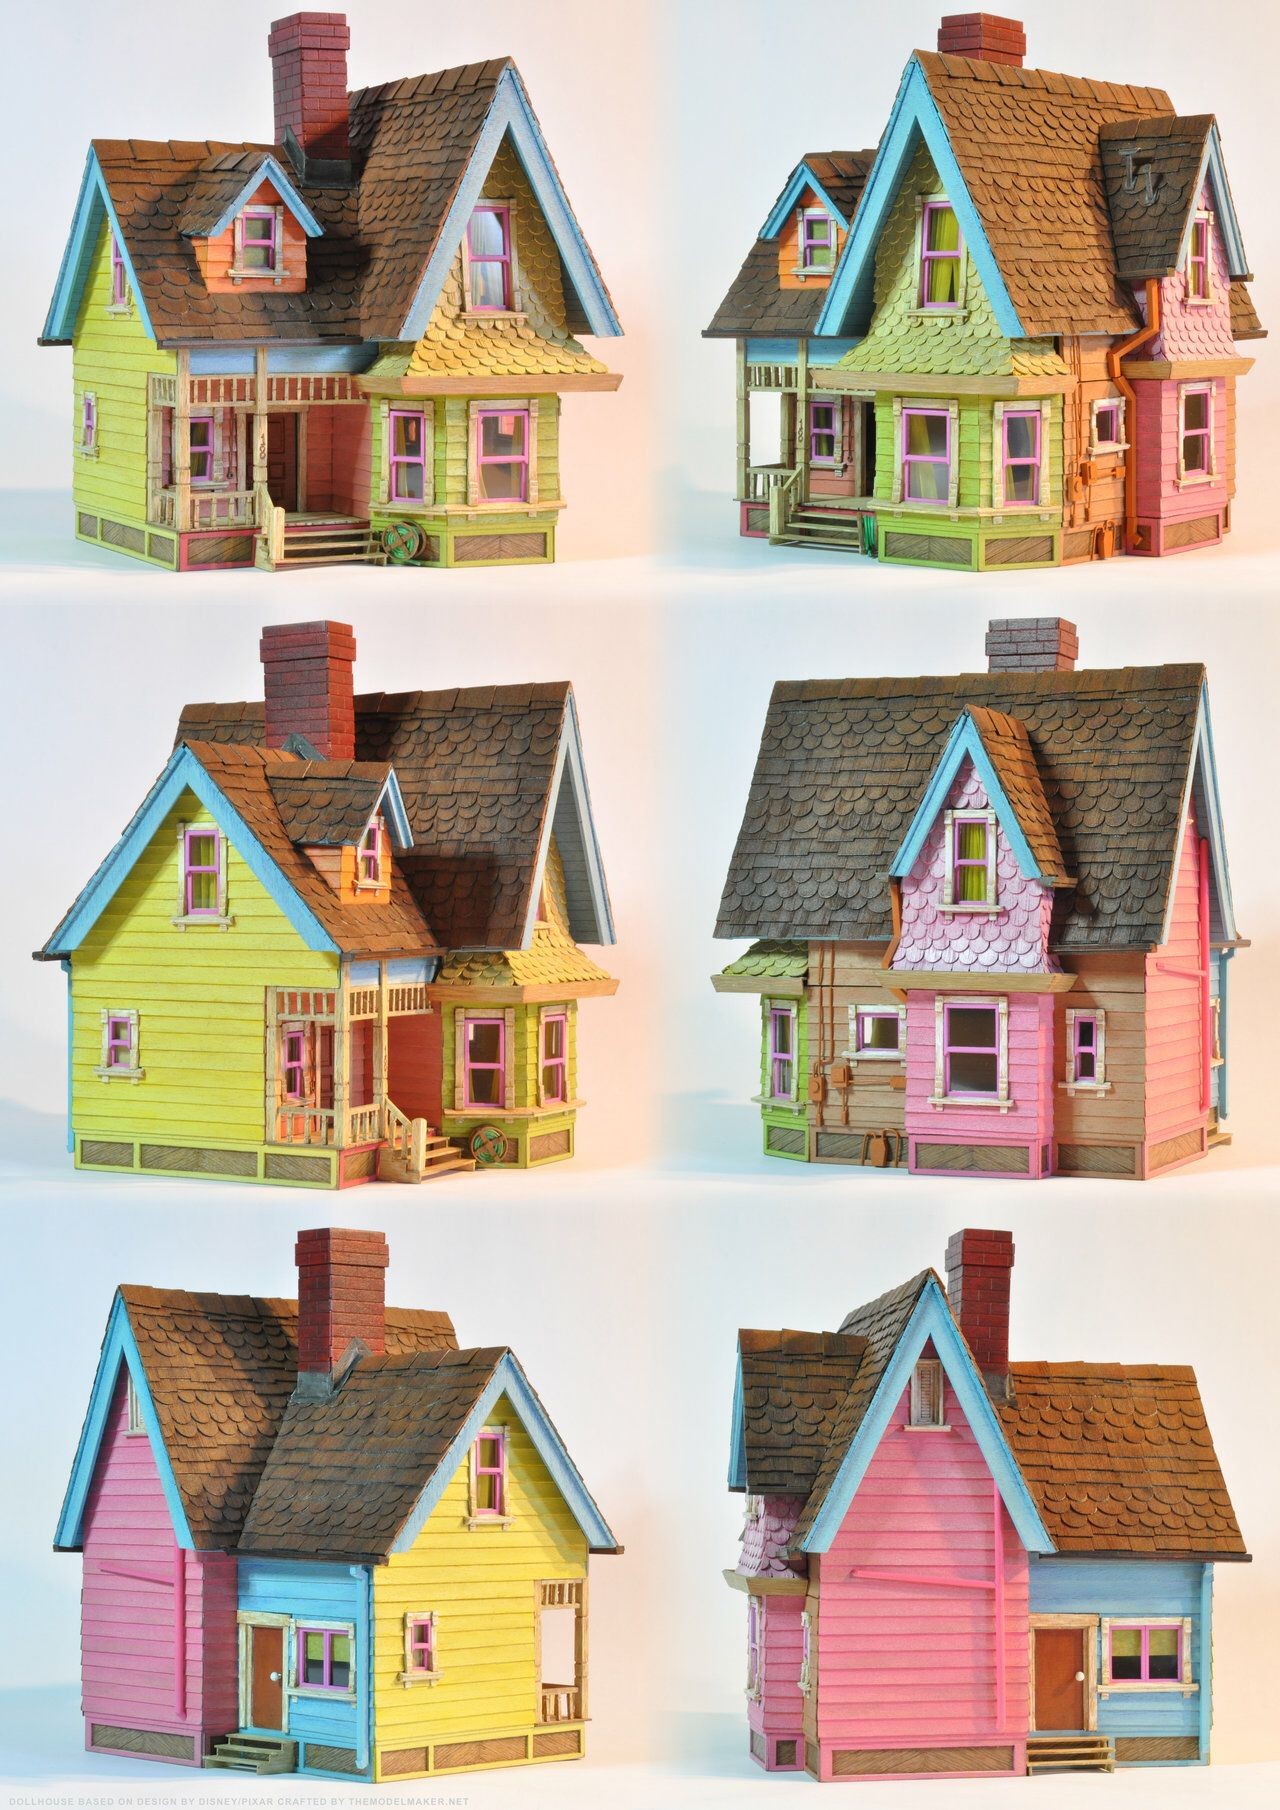 Pin by Sandy on DIY in 2020 Disney up house, Up house pixar, Rainbow